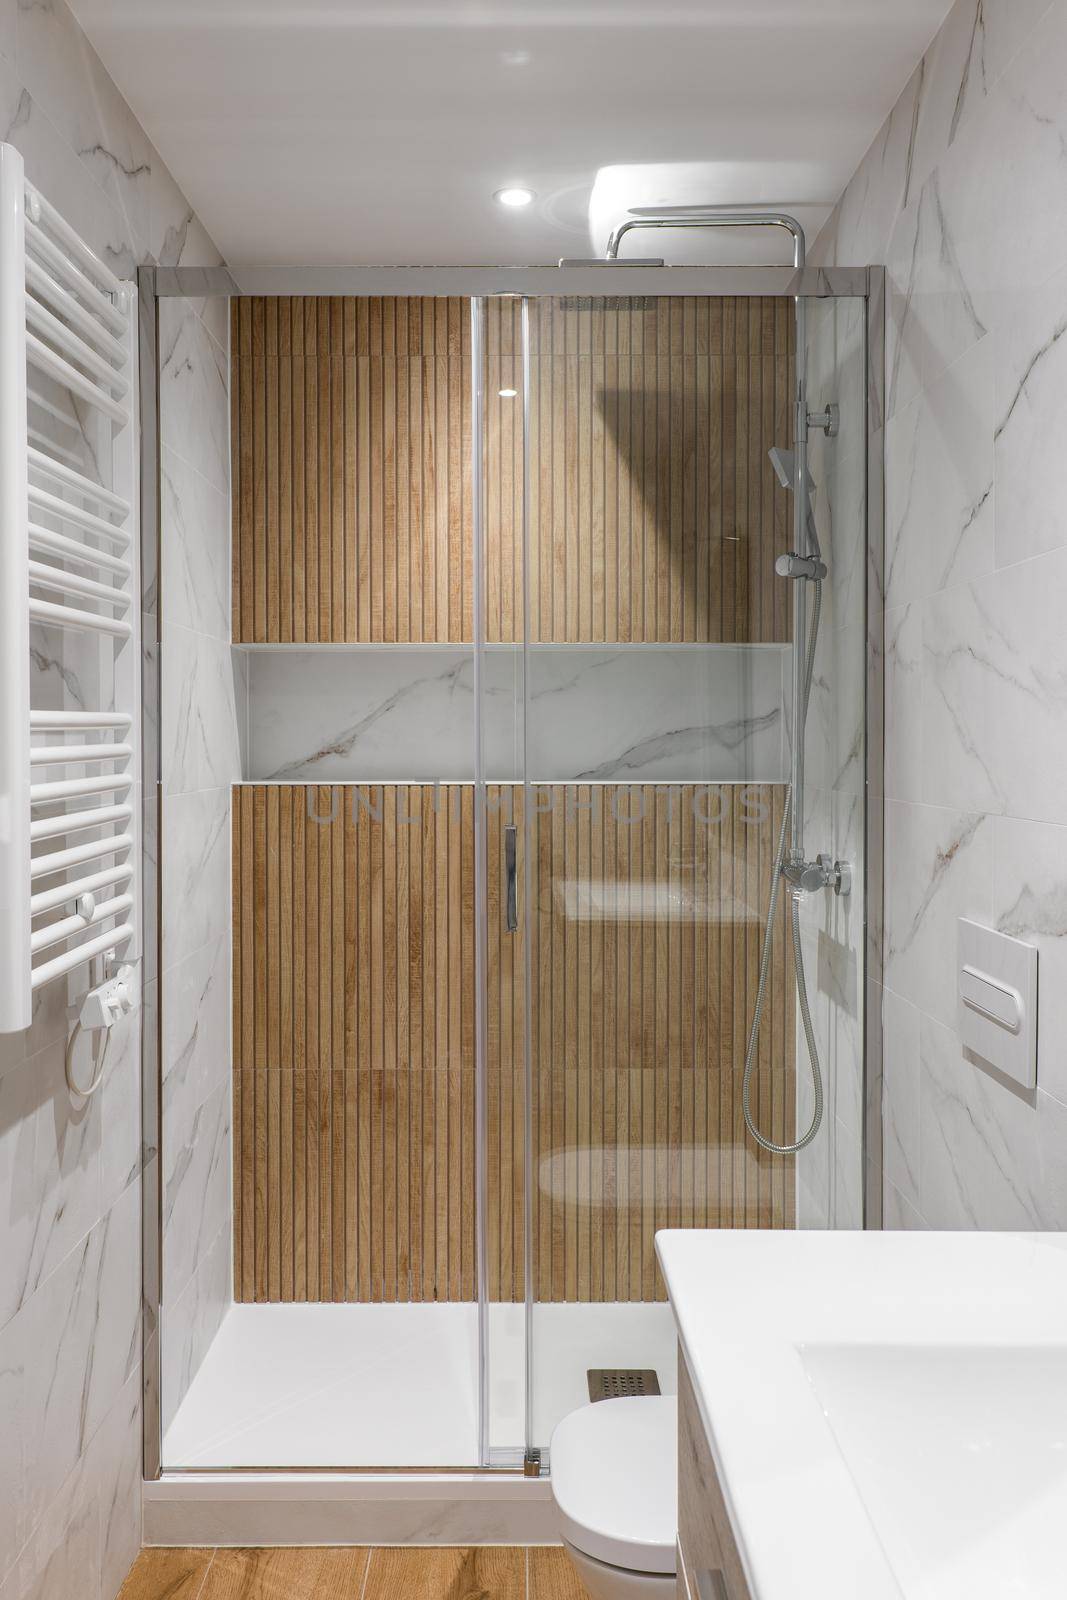 Shower zone with wooden finishing and glass door. Interior of modern refurbished bathroom by apavlin